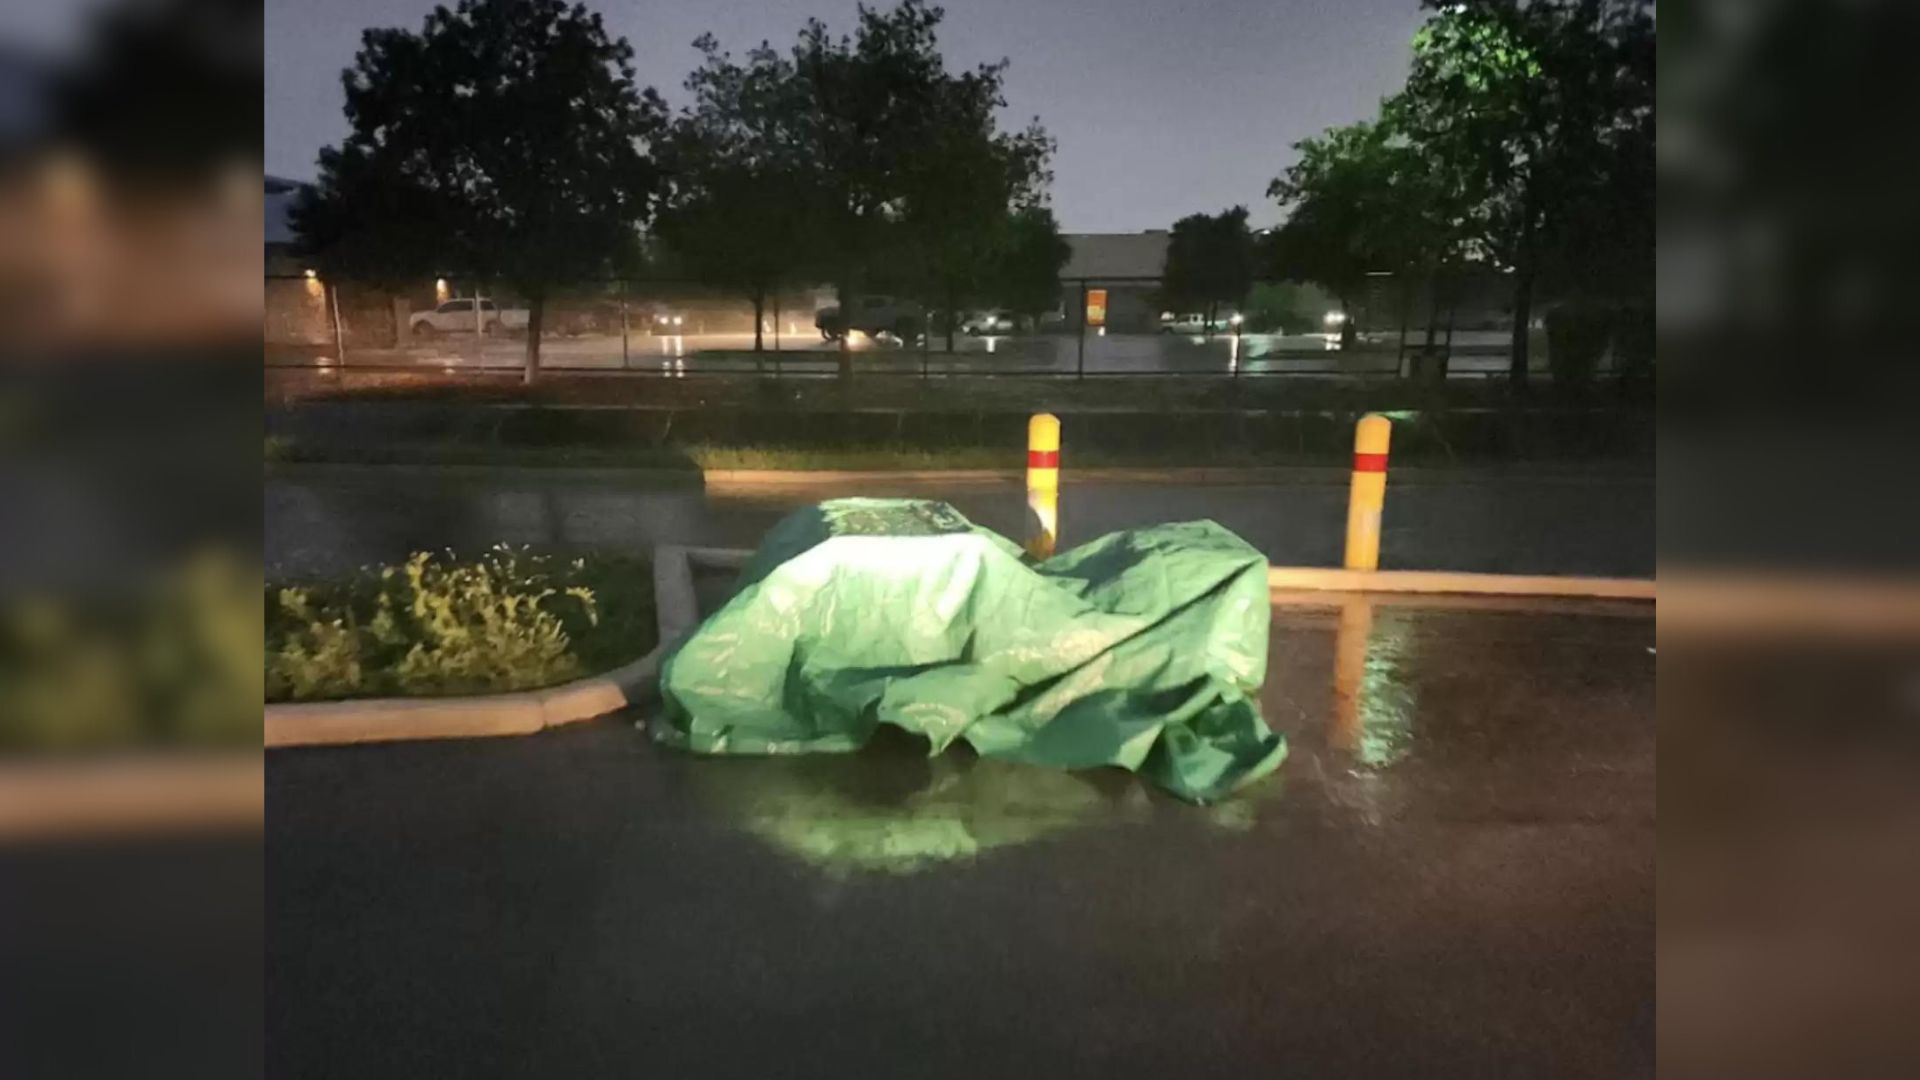 Shelter Workers Were Puzzled By A Mysterious Green Tarp In The Parking Lot, So They Went To Investigate